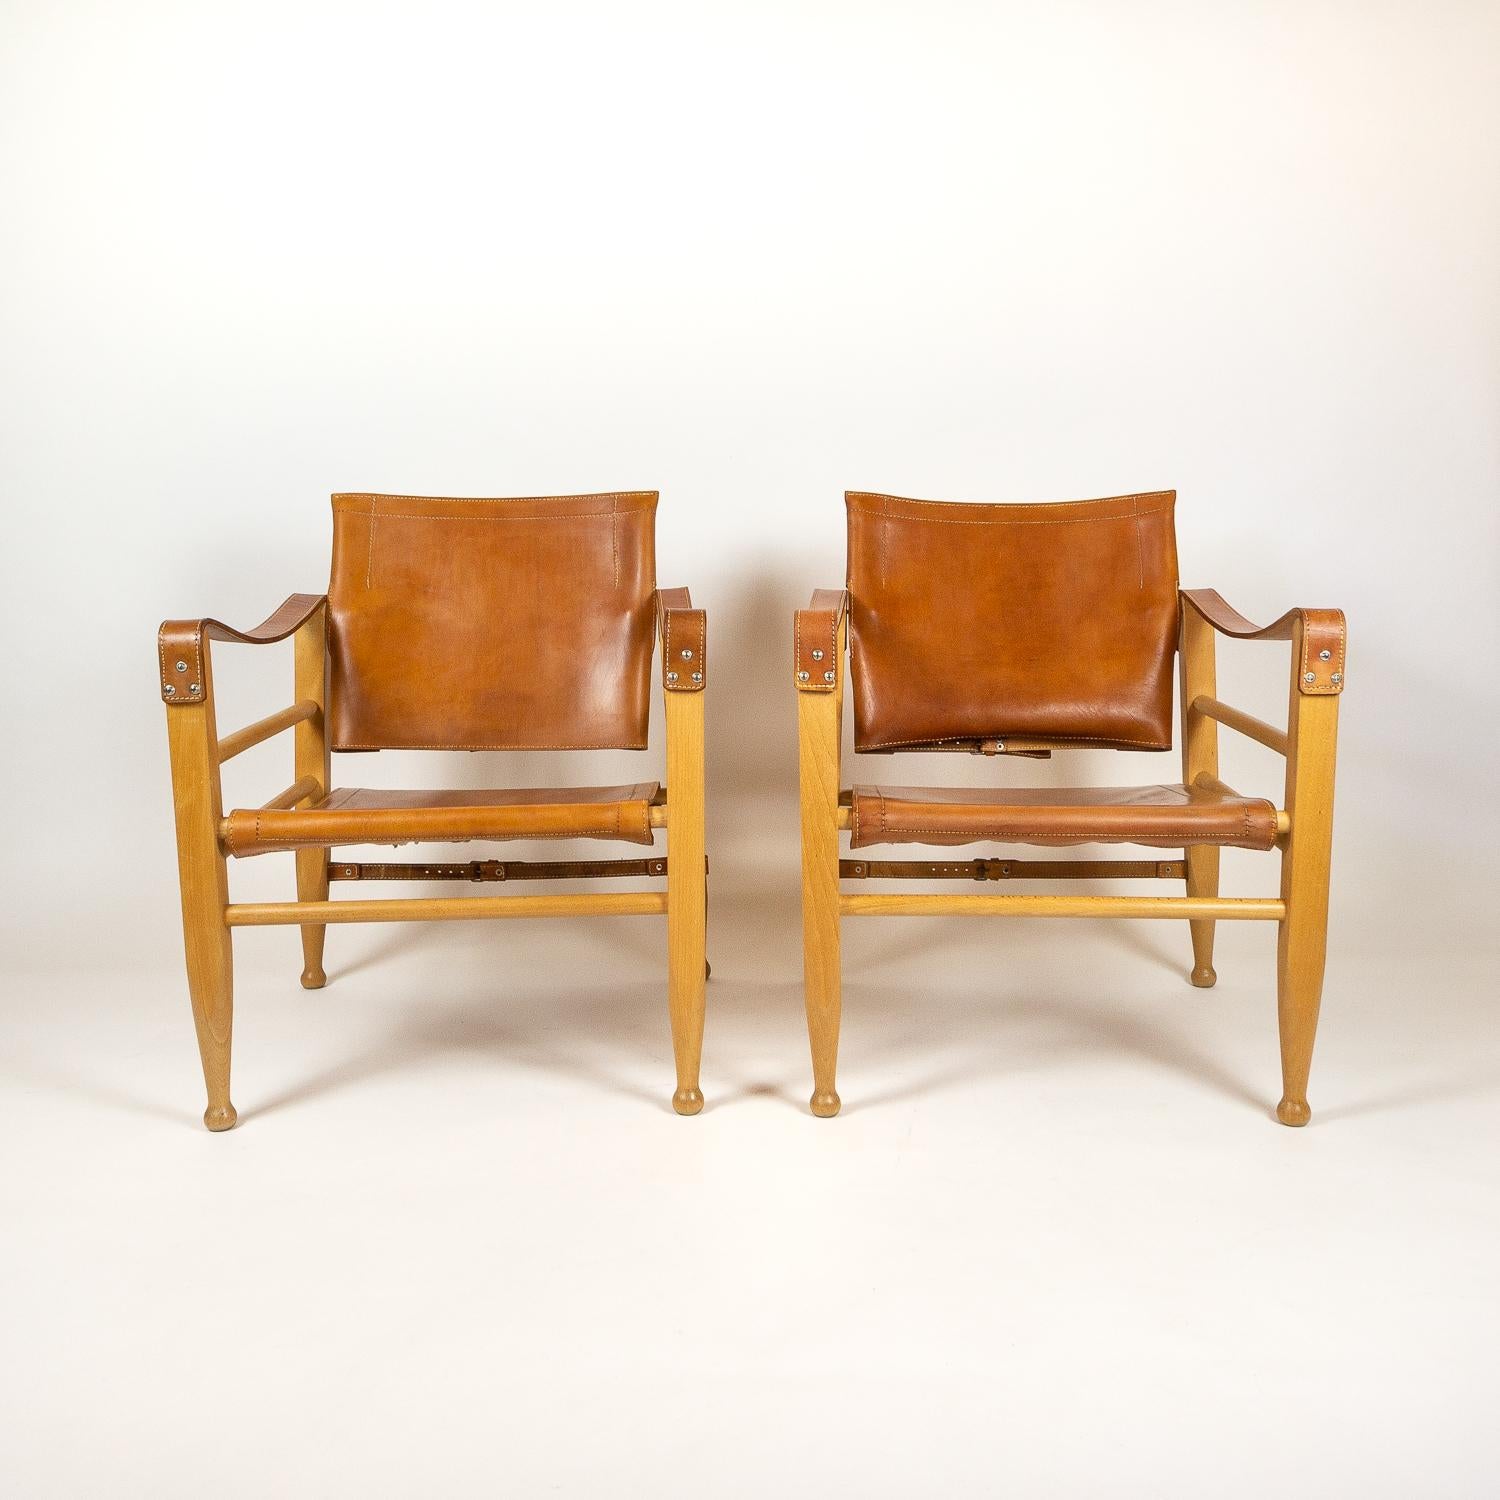 Pair of Aage Bruun and Søn Safari chairs in natural cognac leather and beech. Great vintage condition and patina, Denmark, 1960s.
                 